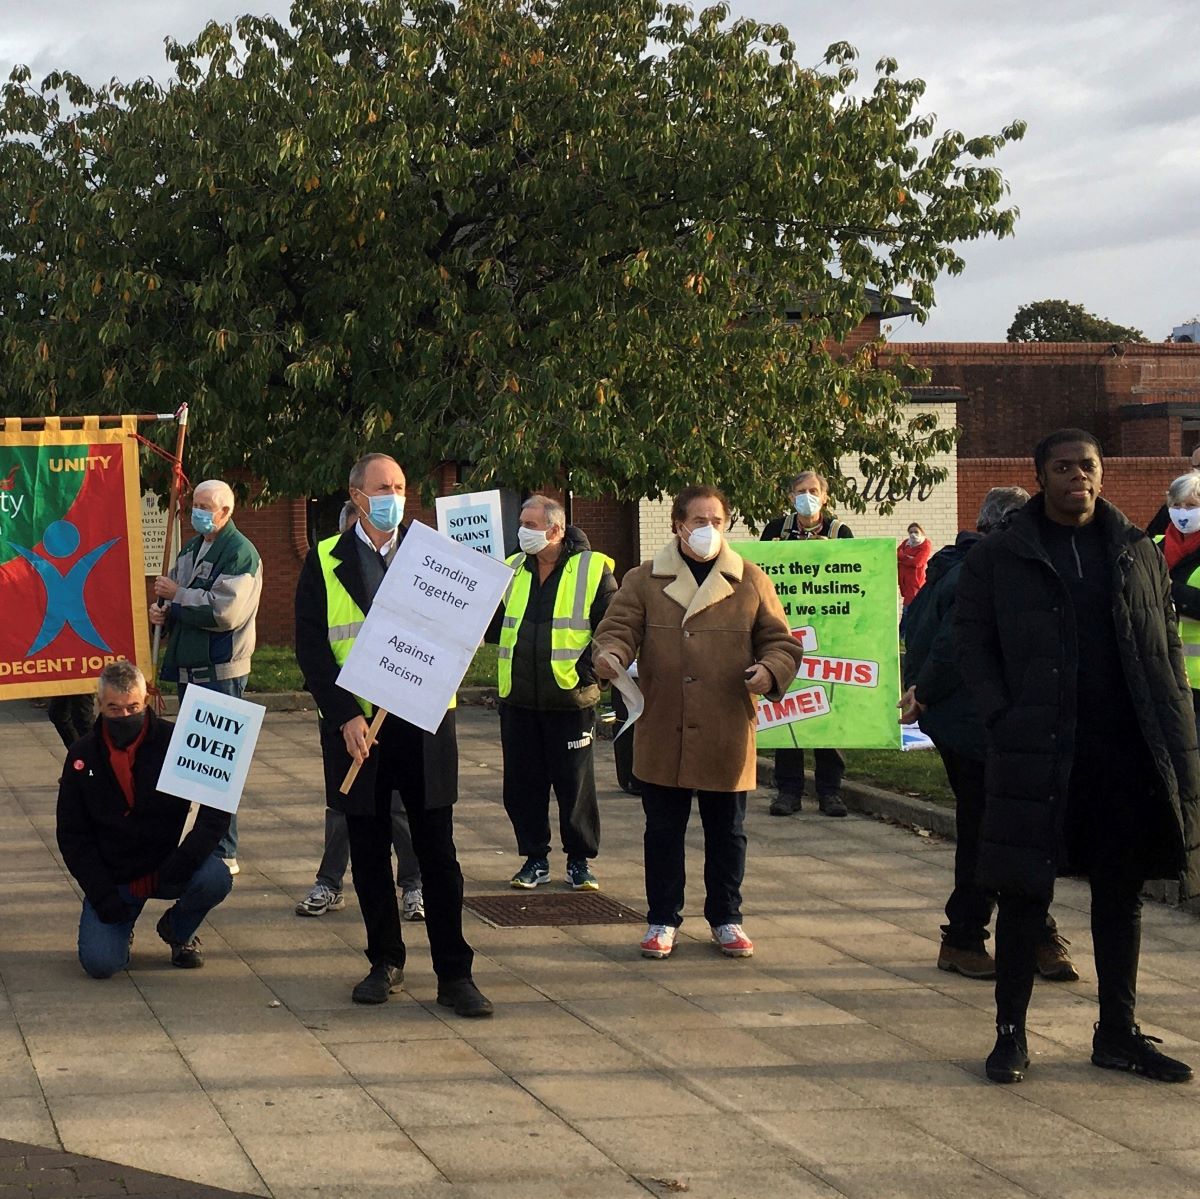 Anti-racism rally in Southampton following racially motivated attack